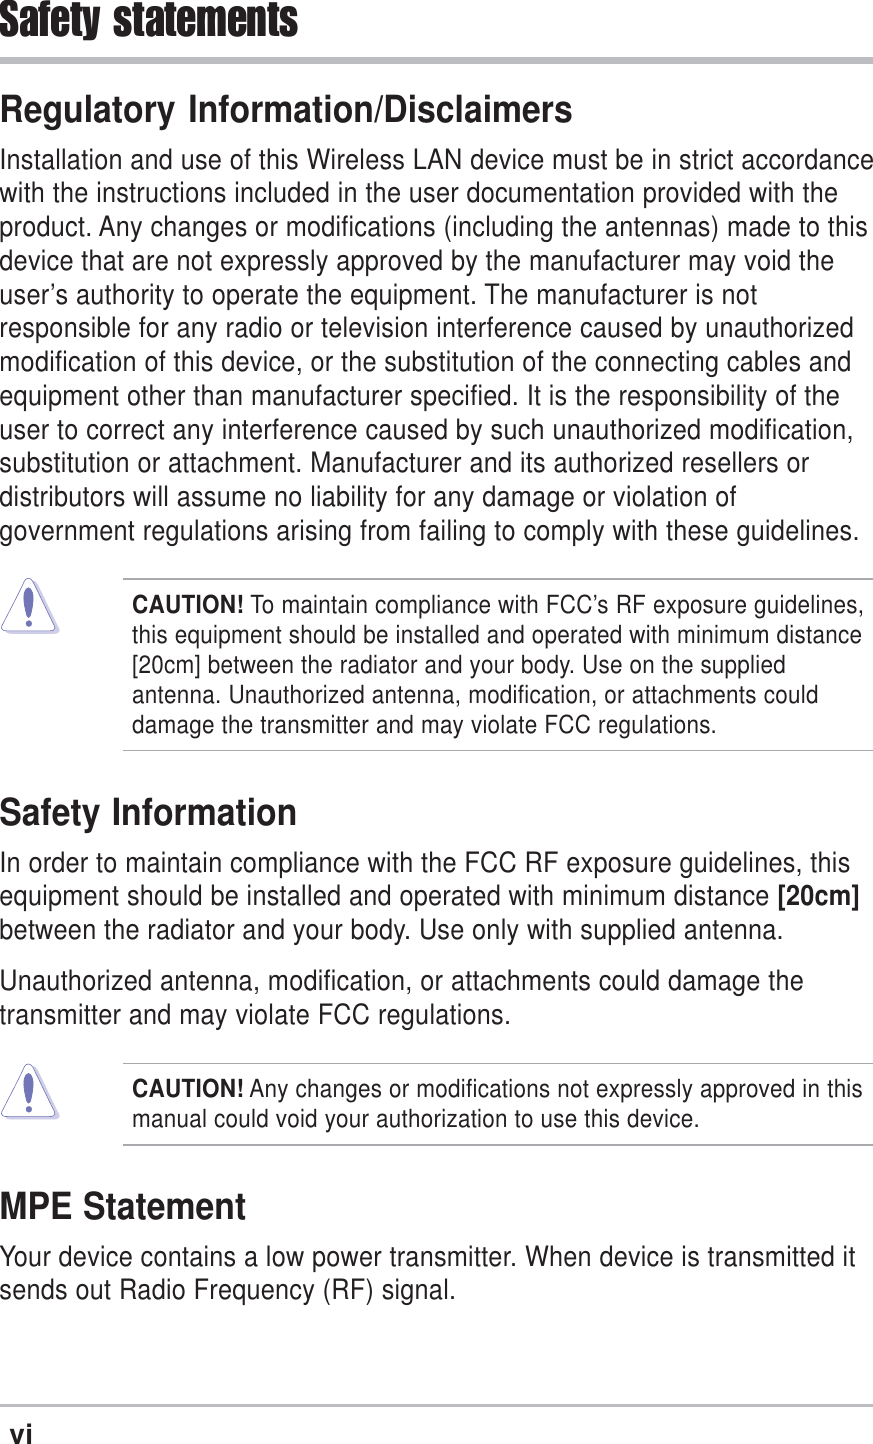 viSafety statementsRegulatory Information/DisclaimersInstallation and use of this Wireless LAN device must be in strict accordancewith the instructions included in the user documentation provided with theproduct. Any changes or modifications (including the antennas) made to thisdevice that are not expressly approved by the manufacturer may void theuser’s authority to operate the equipment. The manufacturer is notresponsible for any radio or television interference caused by unauthorizedmodification of this device, or the substitution of the connecting cables andequipment other than manufacturer specified. It is the responsibility of theuser to correct any interference caused by such unauthorized modification,substitution or attachment. Manufacturer and its authorized resellers ordistributors will assume no liability for any damage or violation ofgovernment regulations arising from failing to comply with these guidelines.CAUTION! To maintain compliance with FCC’s RF exposure guidelines,this equipment should be installed and operated with minimum distance[20cm] between the radiator and your body. Use on the suppliedantenna. Unauthorized antenna, modification, or attachments coulddamage the transmitter and may violate FCC regulations.Safety InformationIn order to maintain compliance with the FCC RF exposure guidelines, thisequipment should be installed and operated with minimum distance [20cm]between the radiator and your body. Use only with supplied antenna.Unauthorized antenna, modification, or attachments could damage thetransmitter and may violate FCC regulations.CAUTION! Any changes or modifications not expressly approved in thismanual could void your authorization to use this device.MPE StatementYour device contains a low power transmitter. When device is transmitted itsends out Radio Frequency (RF) signal.